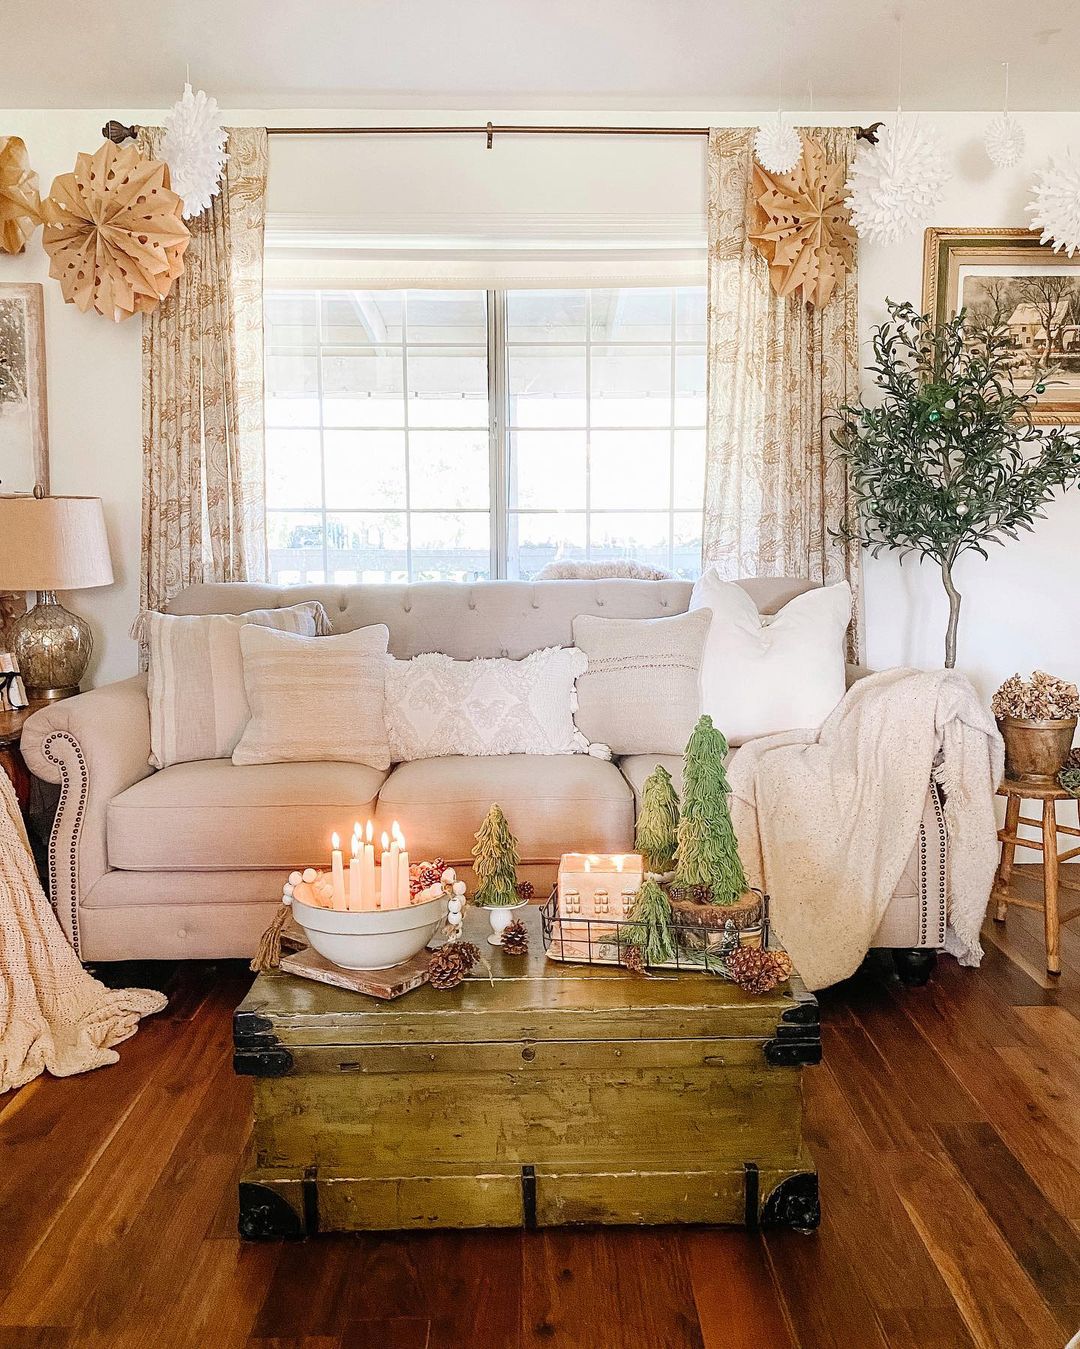 Winter Home Tour in 10 Pictures - Talkdecor